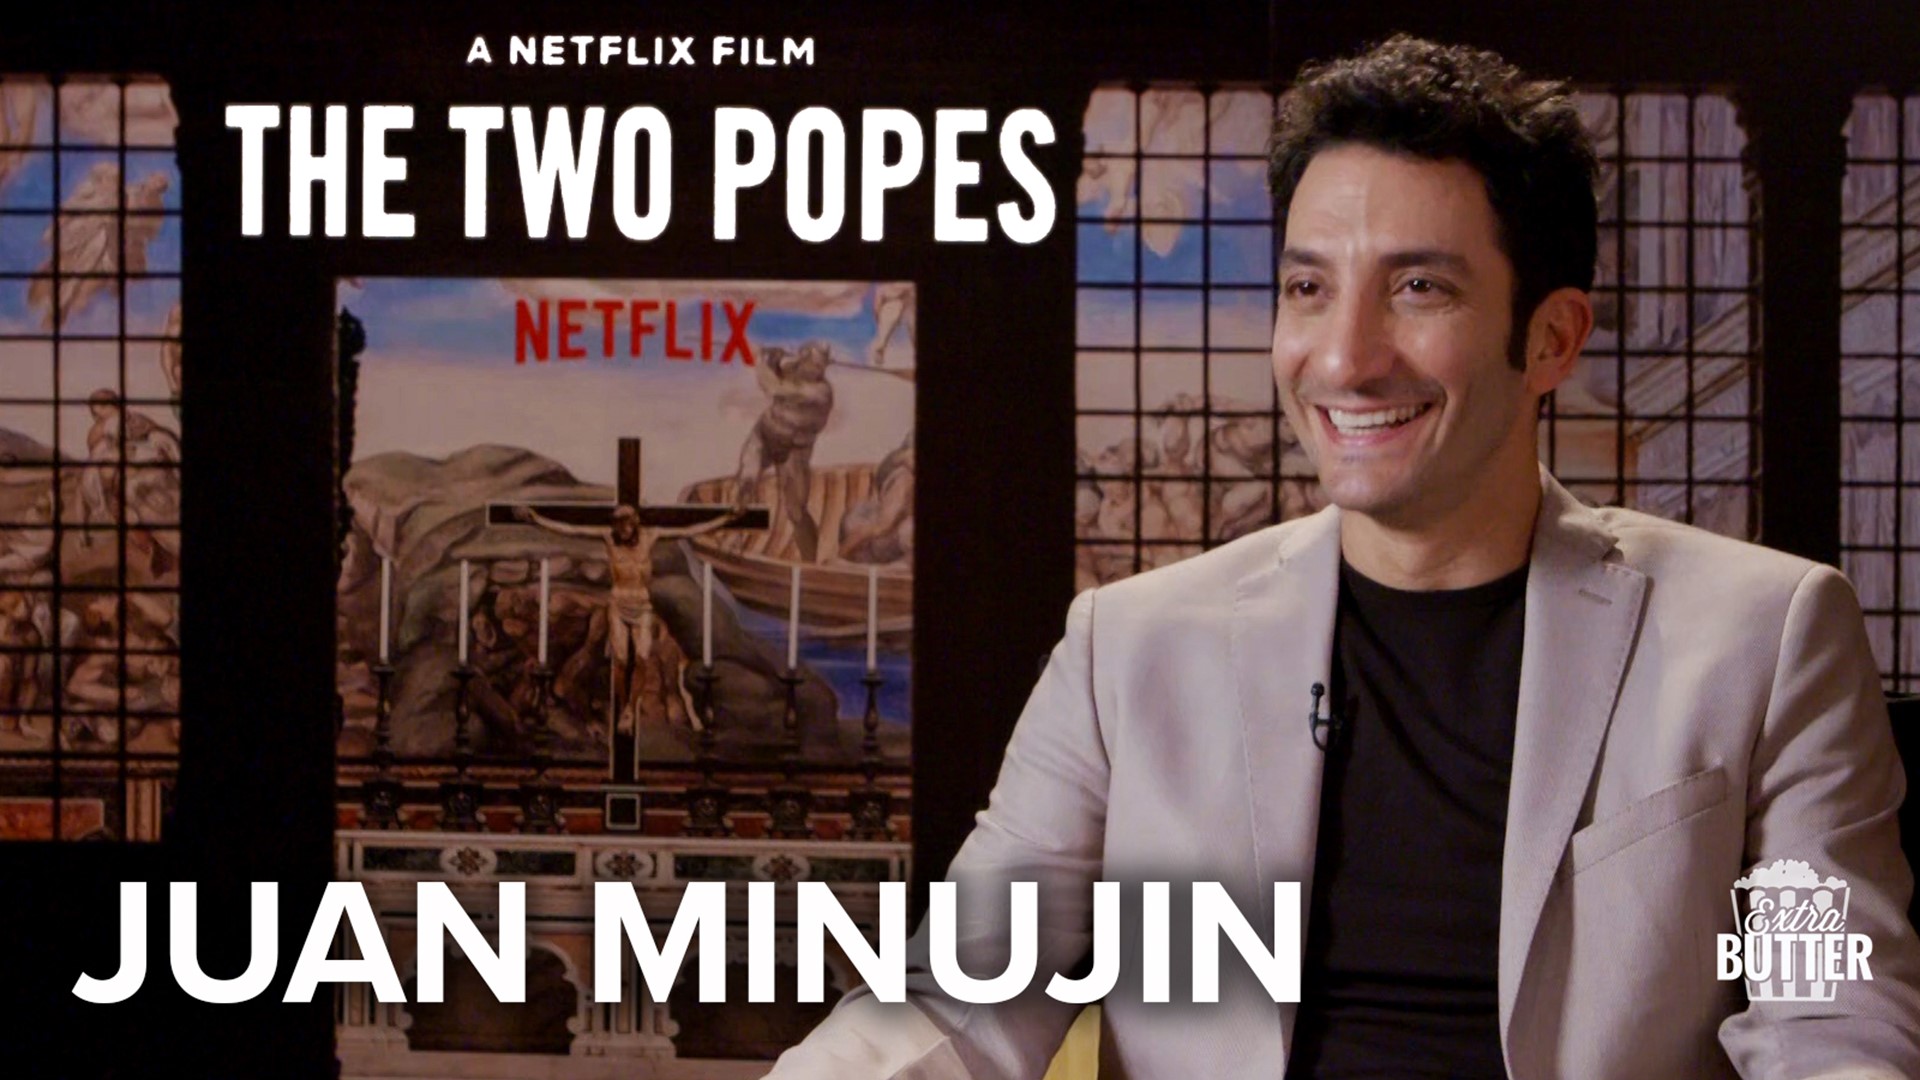 uan Minujín talks about playing Jorge Mario Bergoglio in the Netflix movie, 'The Two Popes.' Juan says he and Jonathan Pryce purposely did not compare notes.